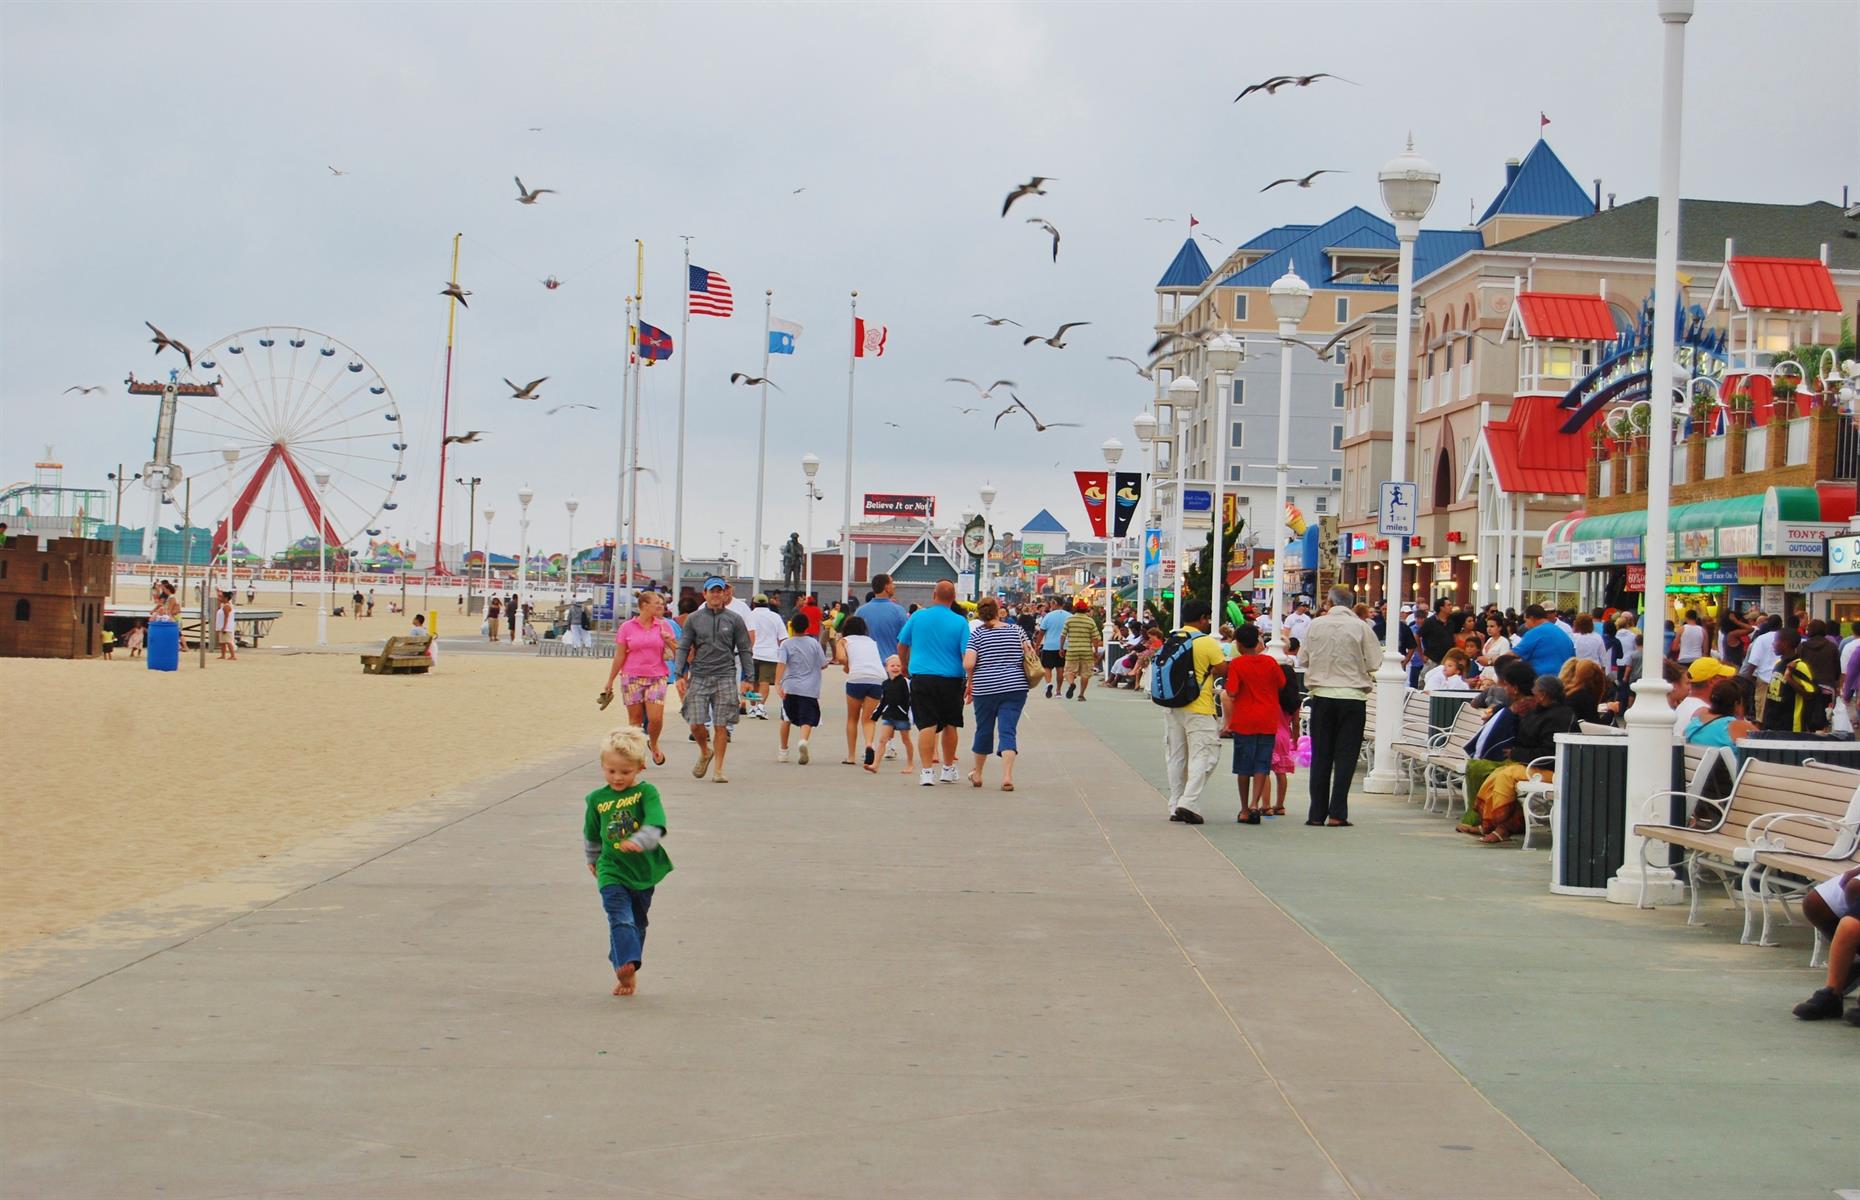 <p>Ocean City's long stretches of sandy beach, iconic boardwalk and amusement park rides have been attracting families since 1875. Being a typical seaside town, it gets pretty overcrowded in summer, making spring an ideal time to visit. The boardwalk itself showcases incredible ocean views but you'll be distracted by its funfair rides, shops and century-old food stalls, including Dolles Candyland which has been dishing out saltwater taffy, caramel popcorn and homemade fudge since 1910. Visit in May for its annual Springfest, a four-day celebration of fun featuring live music, tasty treats and stalls filled with fine arts and crafts to take home as souvenirs.</p>